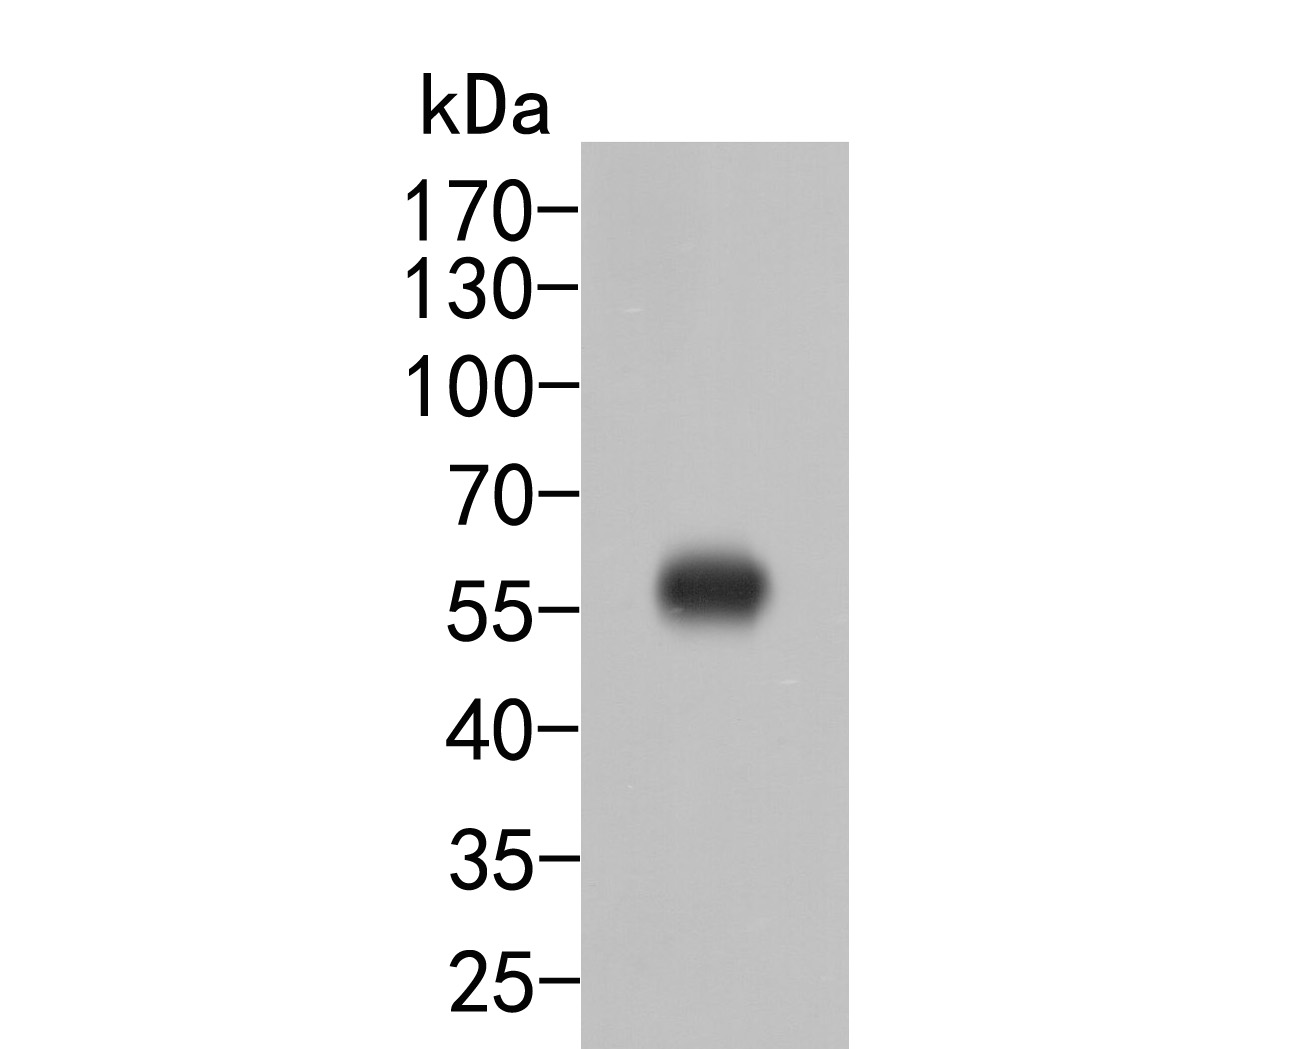 Western blot analysis of SerpinA6 on human placenta tissue lysates. Proteins were transferred to a PVDF membrane and blocked with 5% BSA in PBS for 1 hour at room temperature. The primary antibody (ER2001-70, 1/500) was used in 5% BSA at room temperature for 2 hours. Goat Anti-Rabbit IgG - HRP Secondary Antibody (HA1001) at 1:5,000 dilution was used for 1 hour at room temperature.